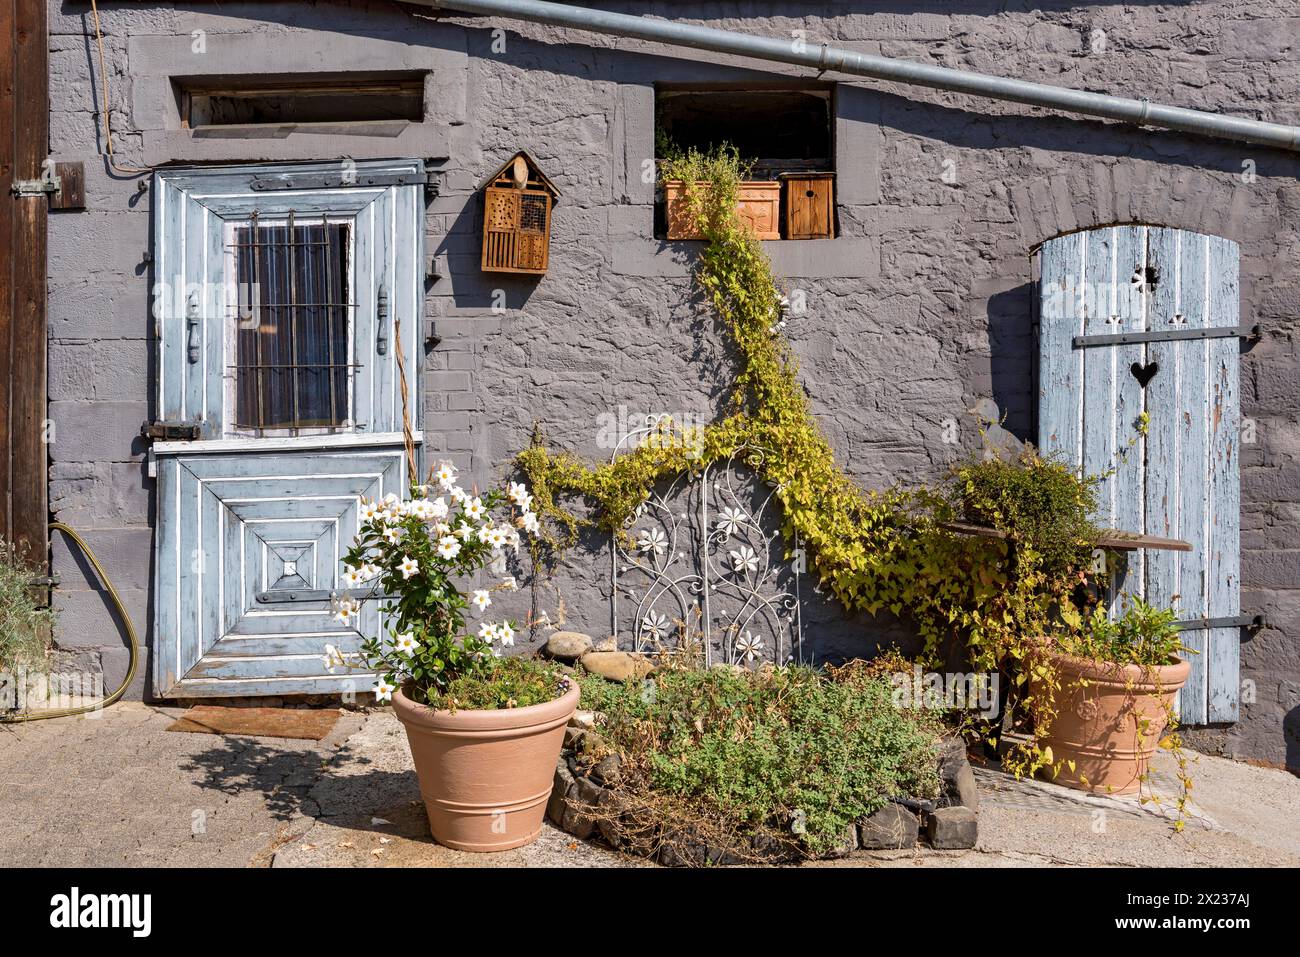 Old farmhouse, facade, decorated, flower pots, dipladenia (Mandevilla boliviensis), knotweed (Fallopia baldschuanica), weathered wooden door with Stock Photo